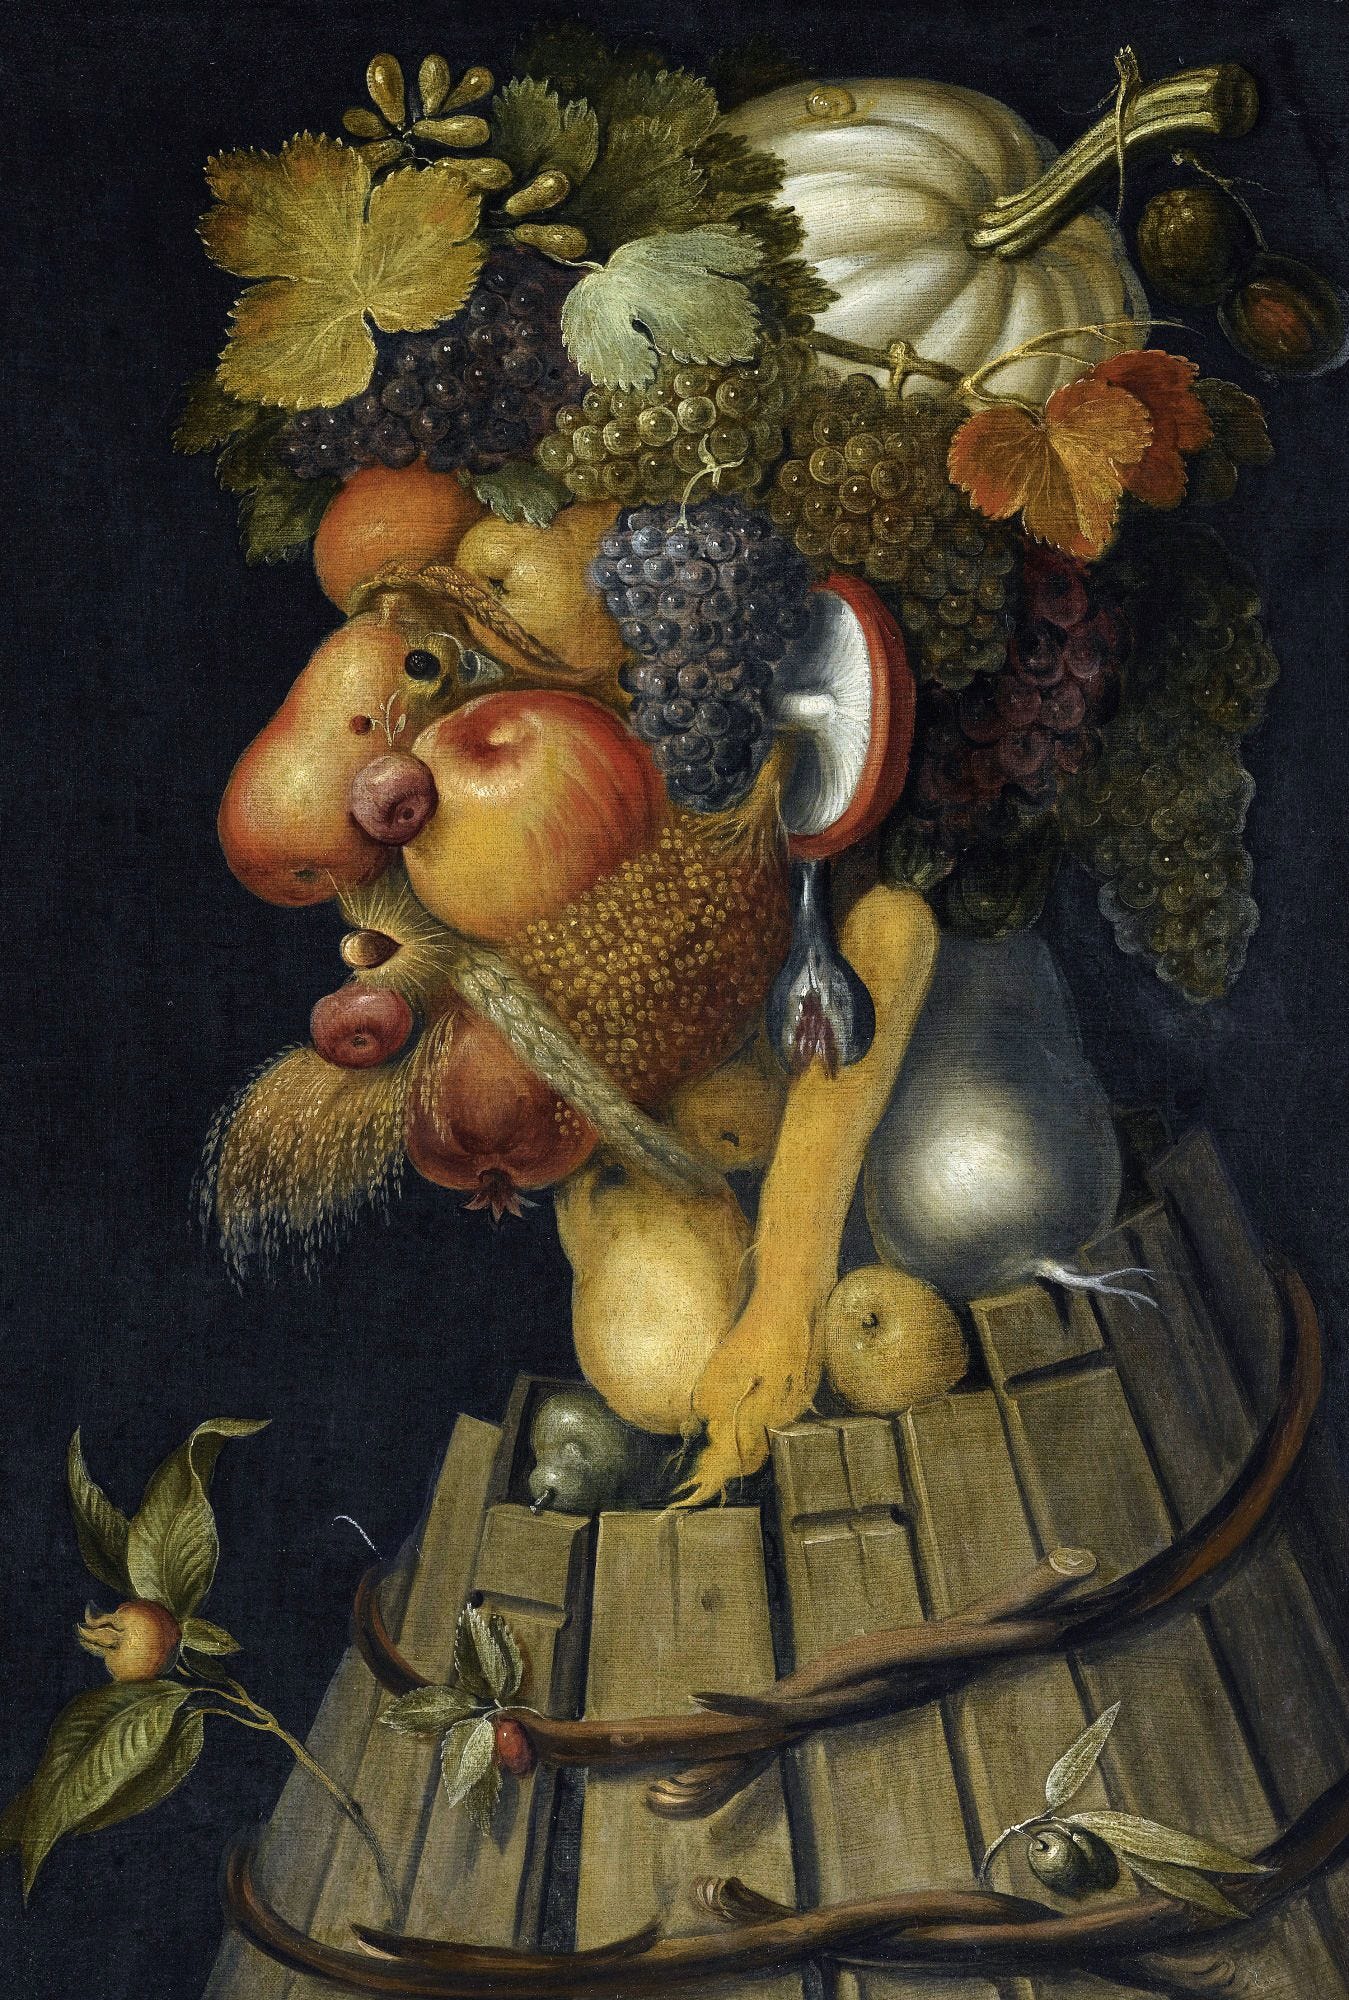 A figure constructed of autumn fruits and vegetables